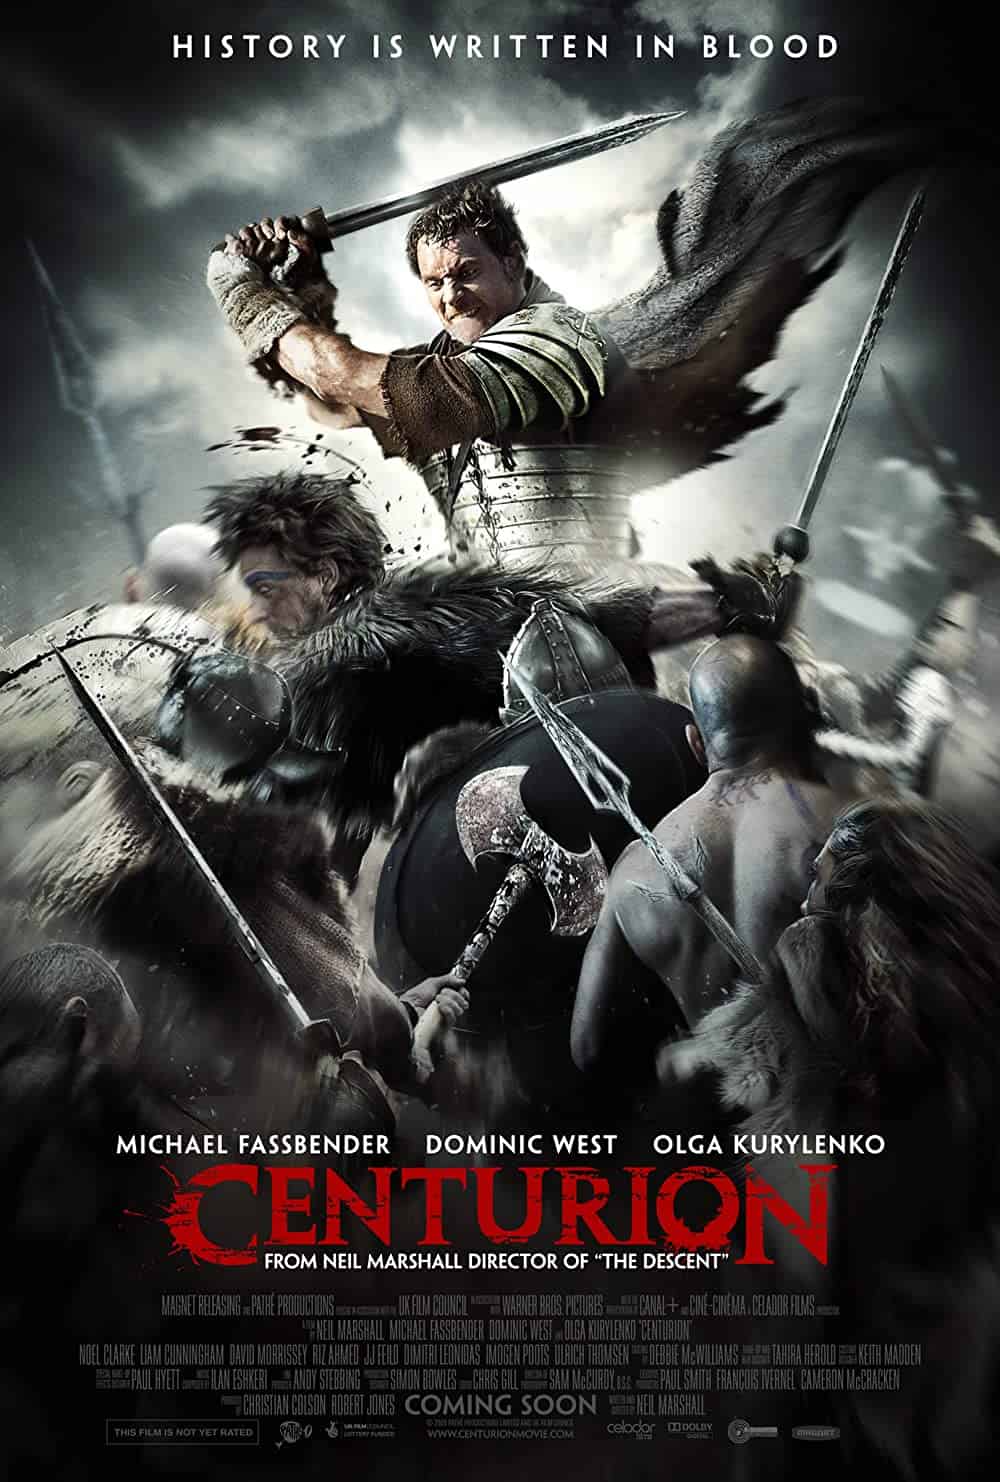 Centurion (2010) Best Movies About Rome to Watch and Re-Watch